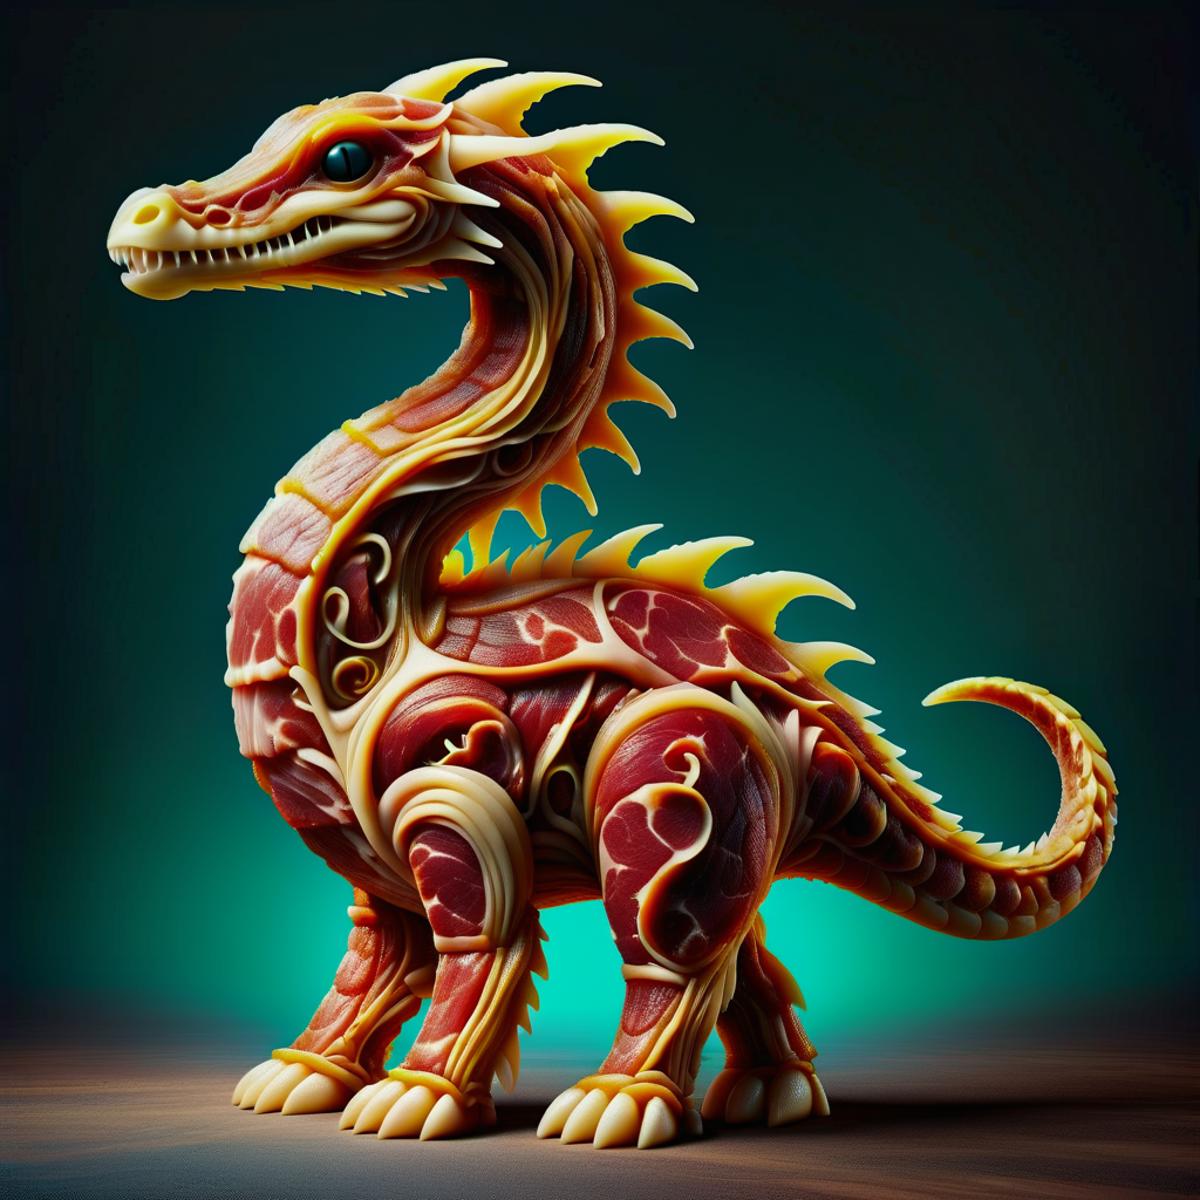 A 3D sculpture of a dragon, featuring a steampunk design with gears and a green background.